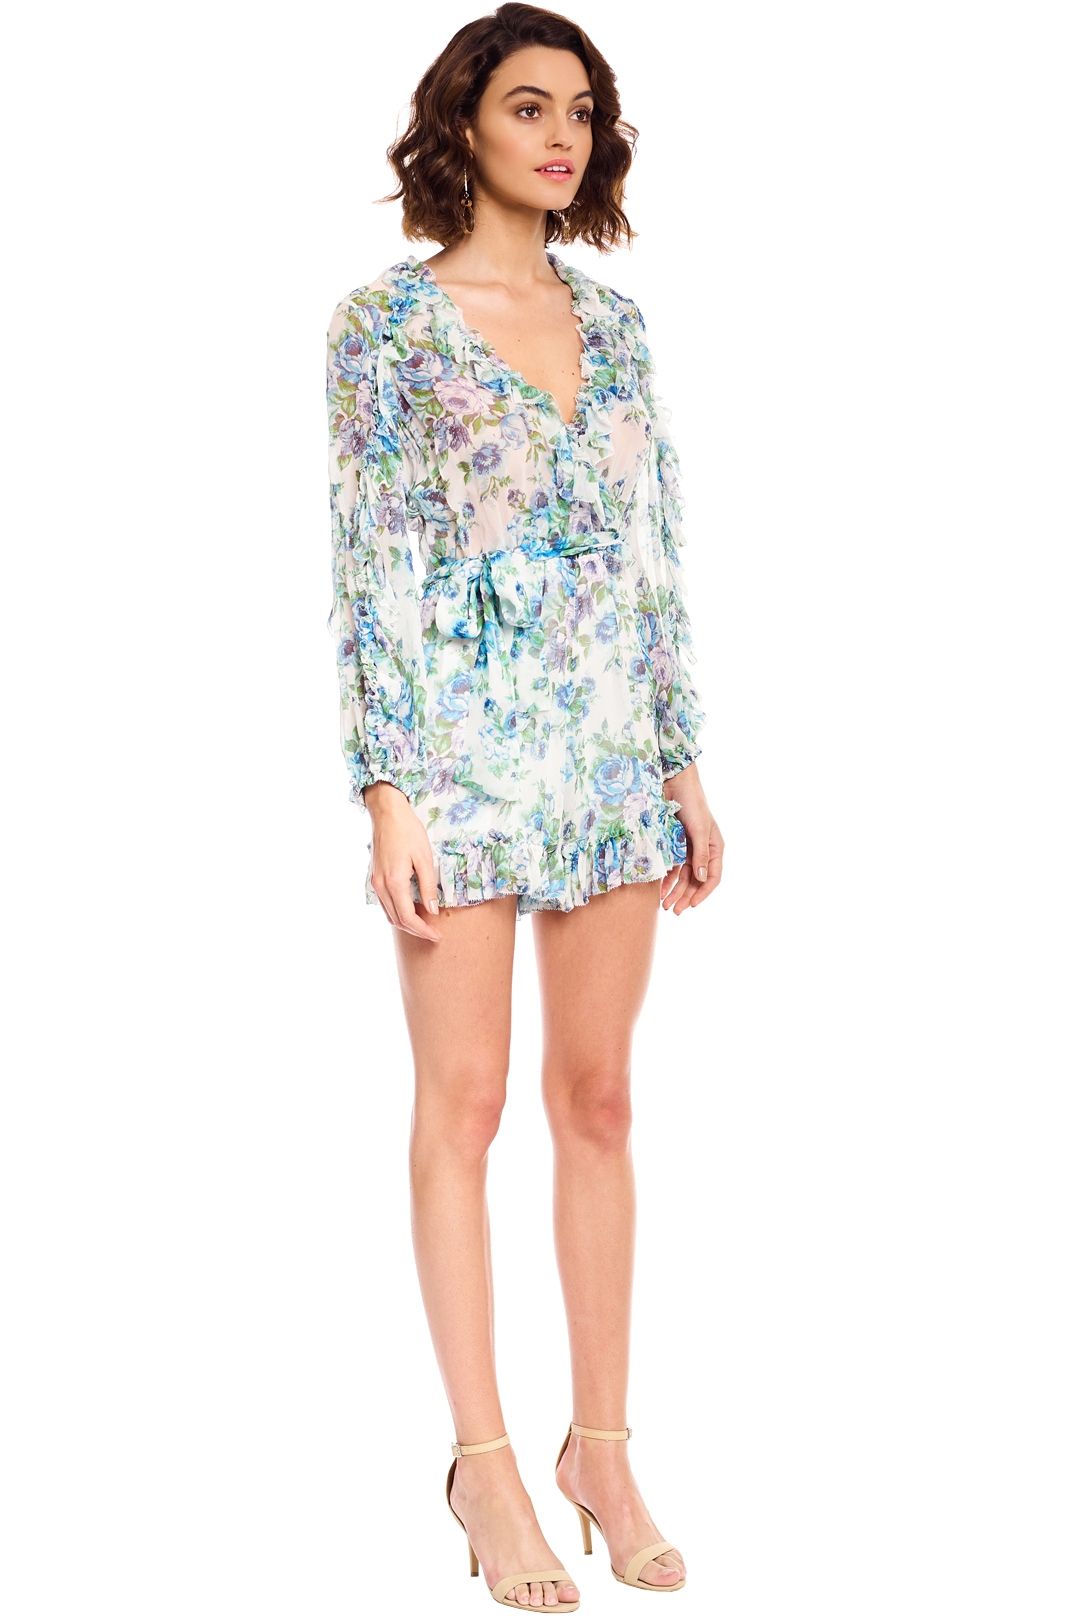 Zimmermann - Whitewave Ruffle Playsuit - Blue Floral - Side